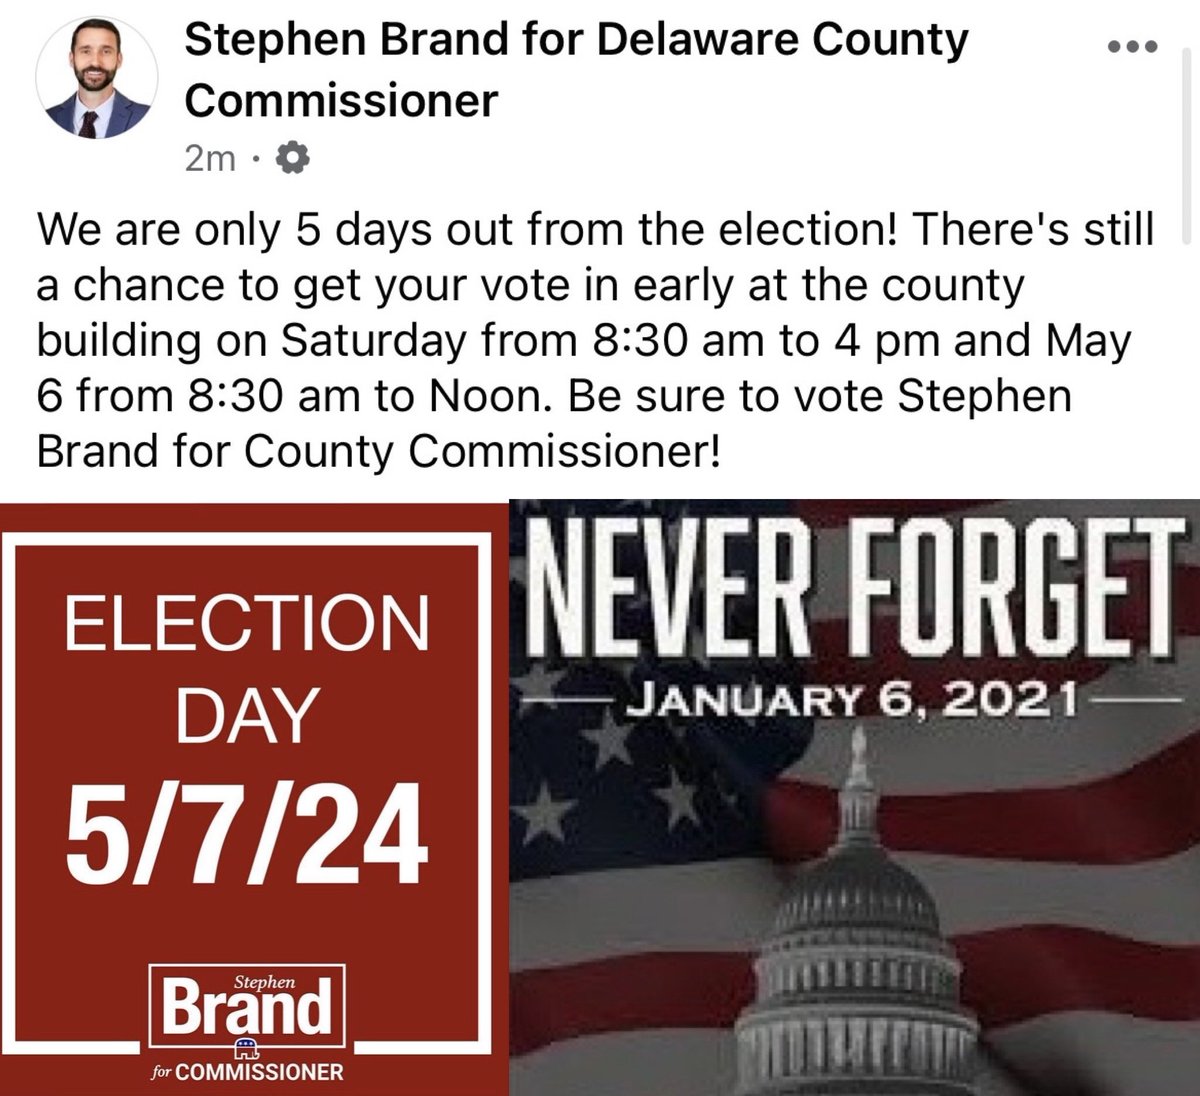 Stephen Brand wants to remind us to vote on 5/7/24. Please keep another date in mind when you vote-1/6/21. Never forget January 6th. Brand’s participation in the insurrection is all you need to remember. #StephenBrand #MuncieMAGA #NeverForgetJanuary6th #Muncie #Indiana #StopMAGA